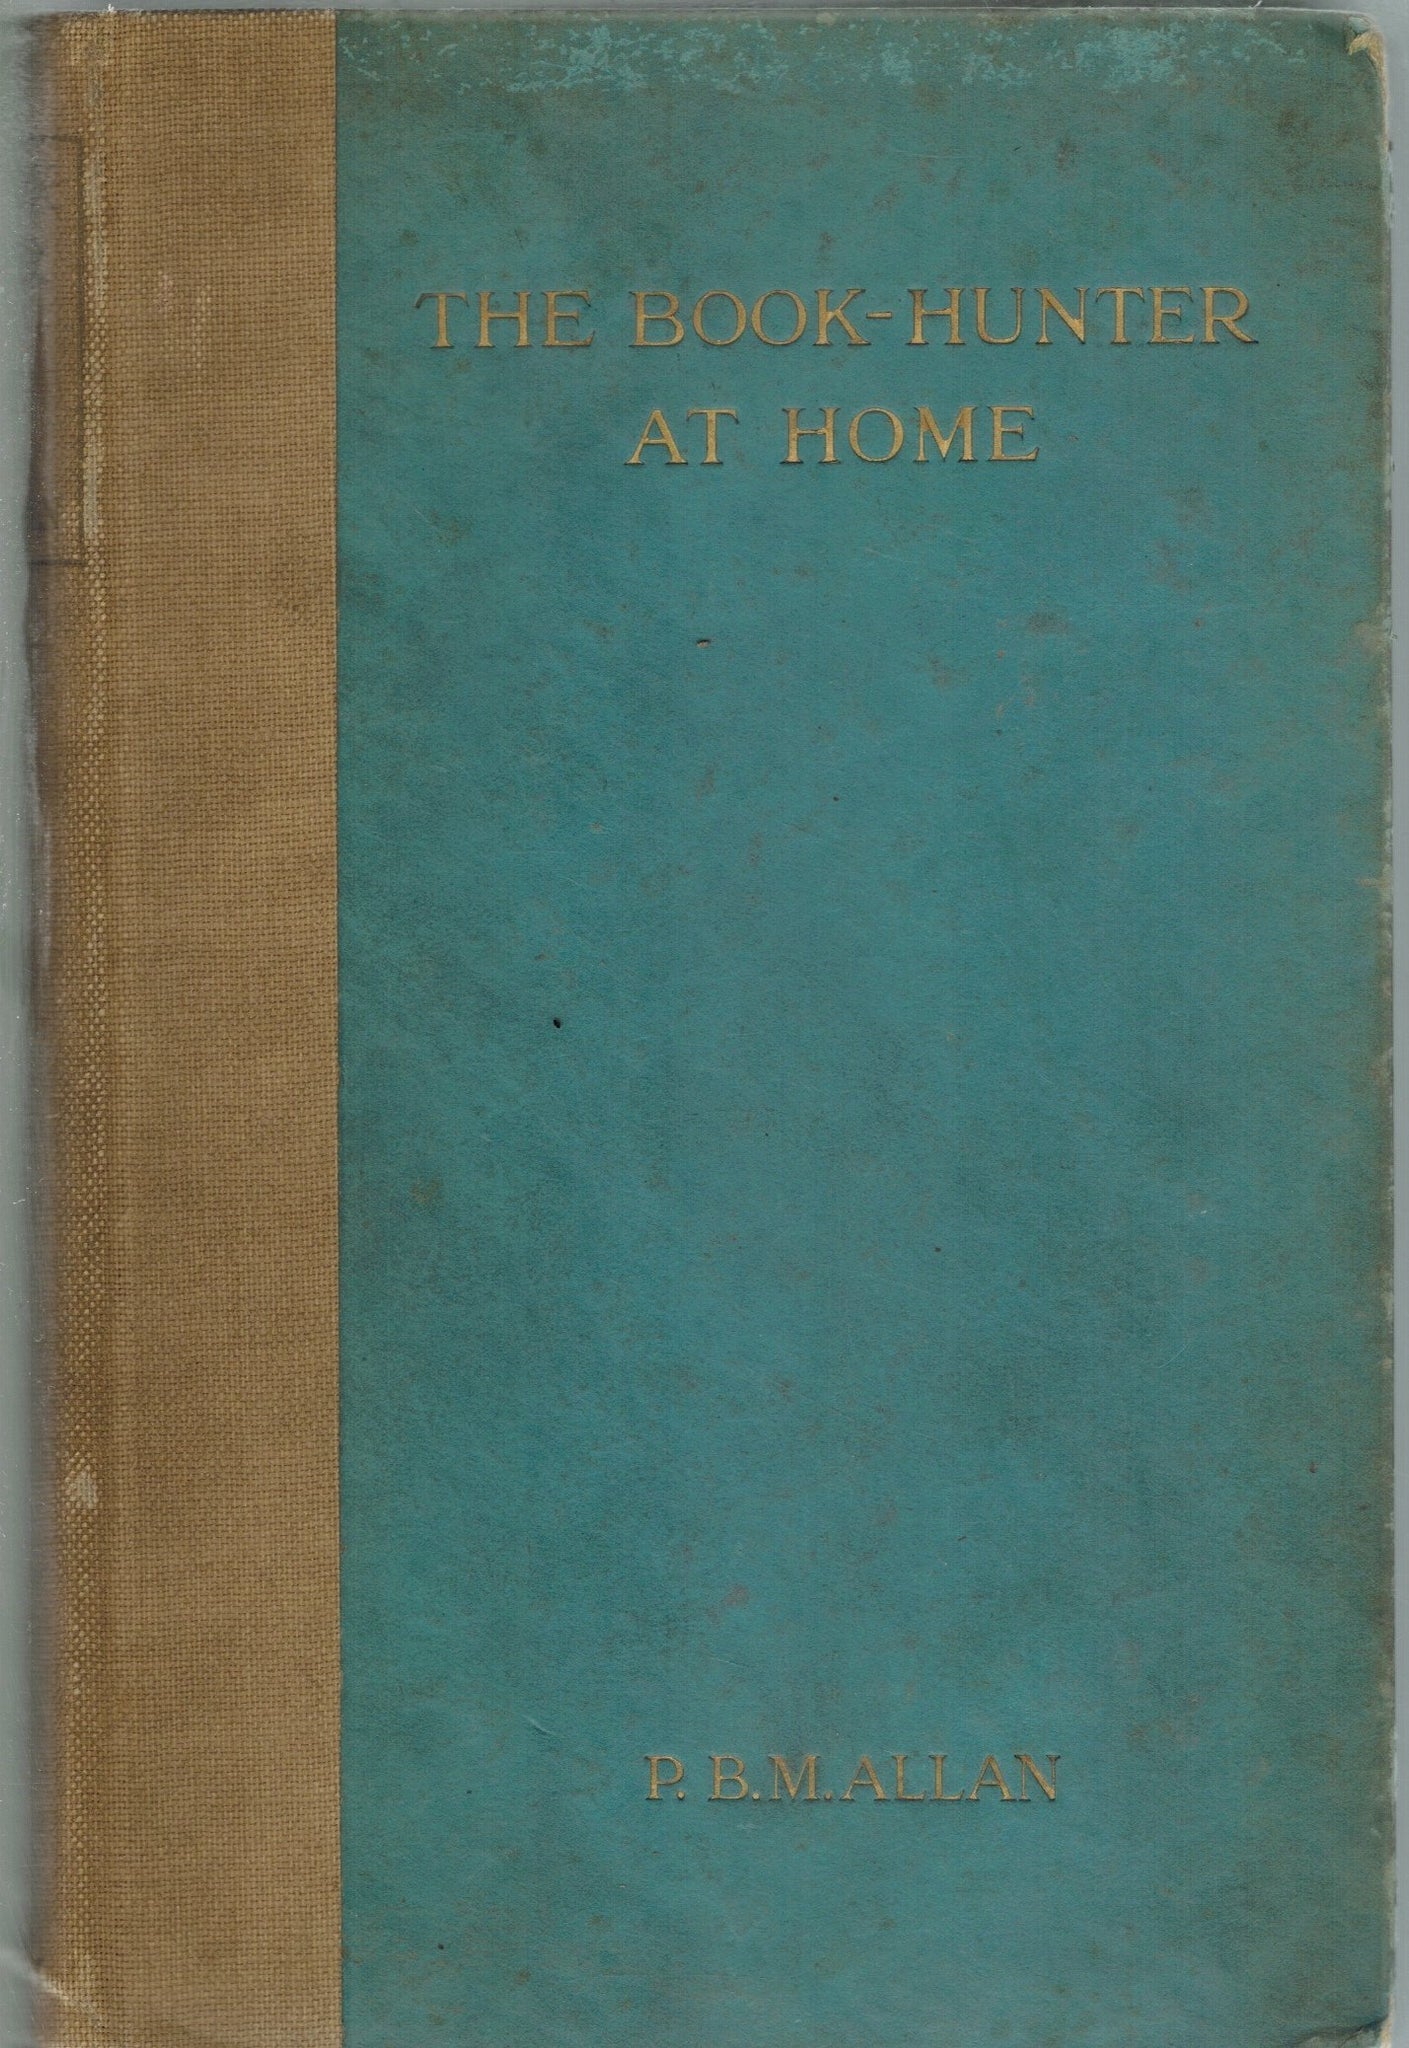 THE BOOK-HUNTER AT HOME,  by Allan, P. B. M